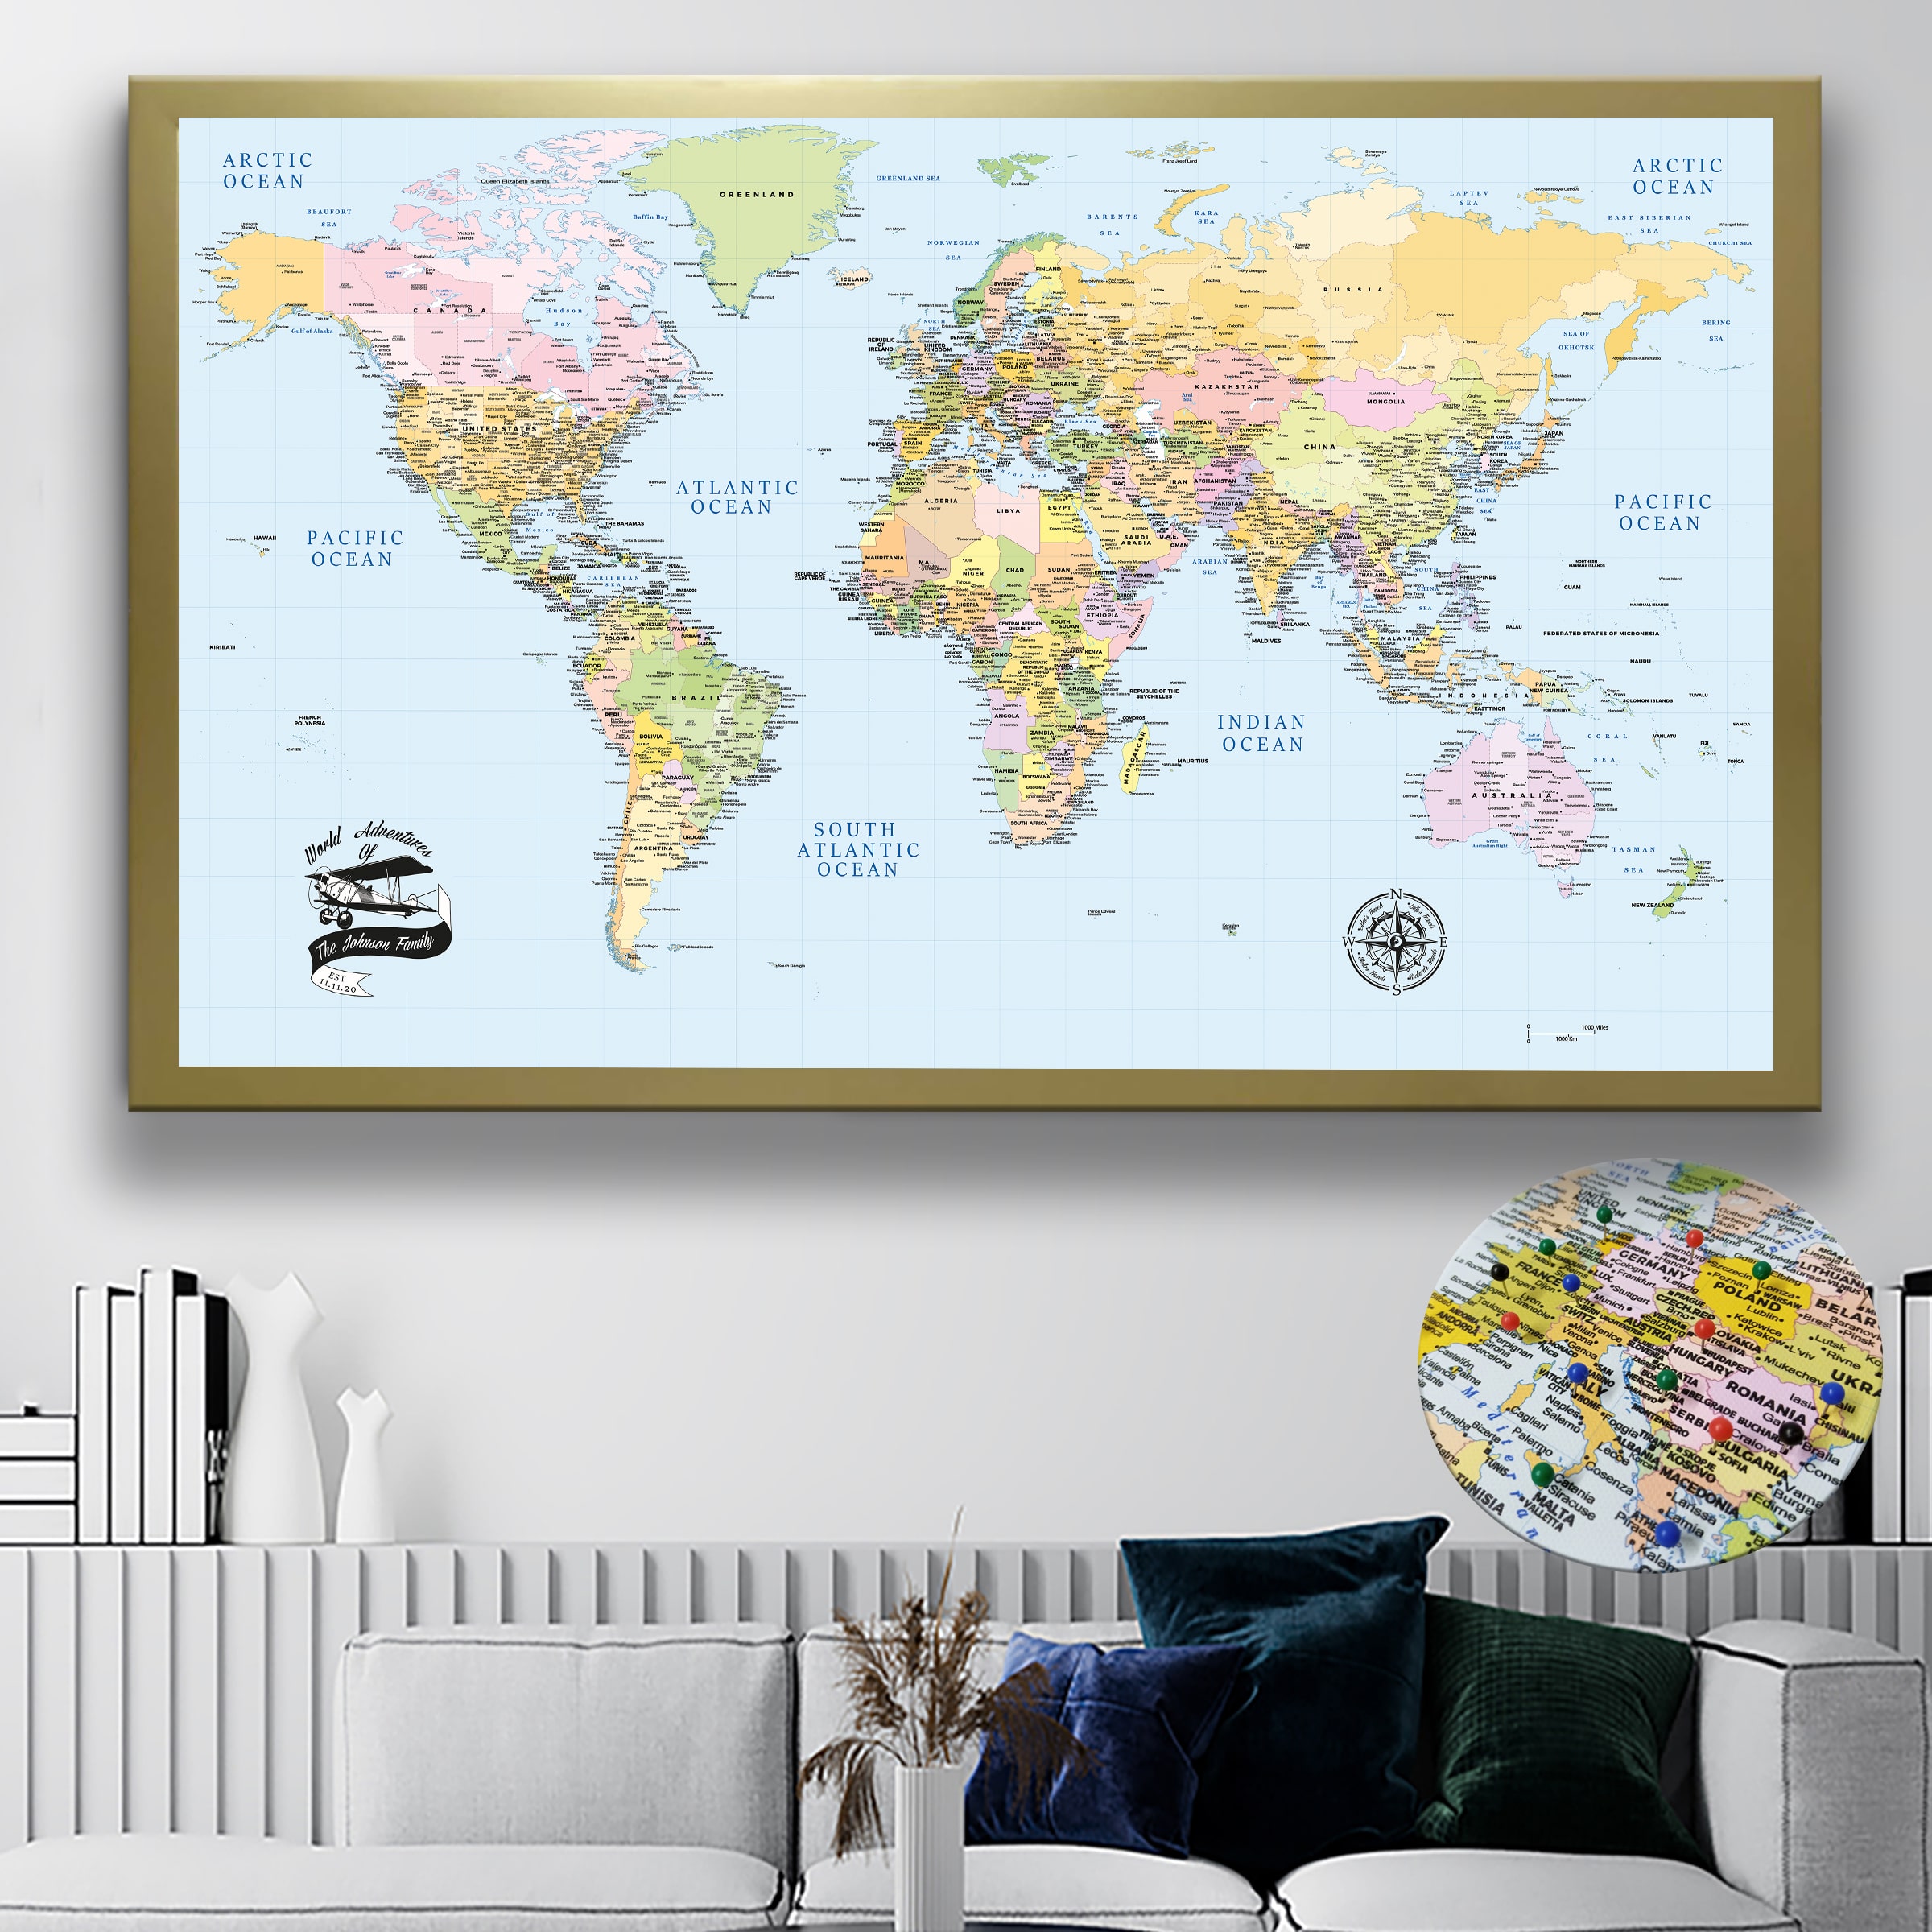  World Travel Map Push Pin on Canvas - Detailed World Map Pin  Board - Travel Destinations Map World Map Wall Art by Pin Adventure map :  Home & Kitchen